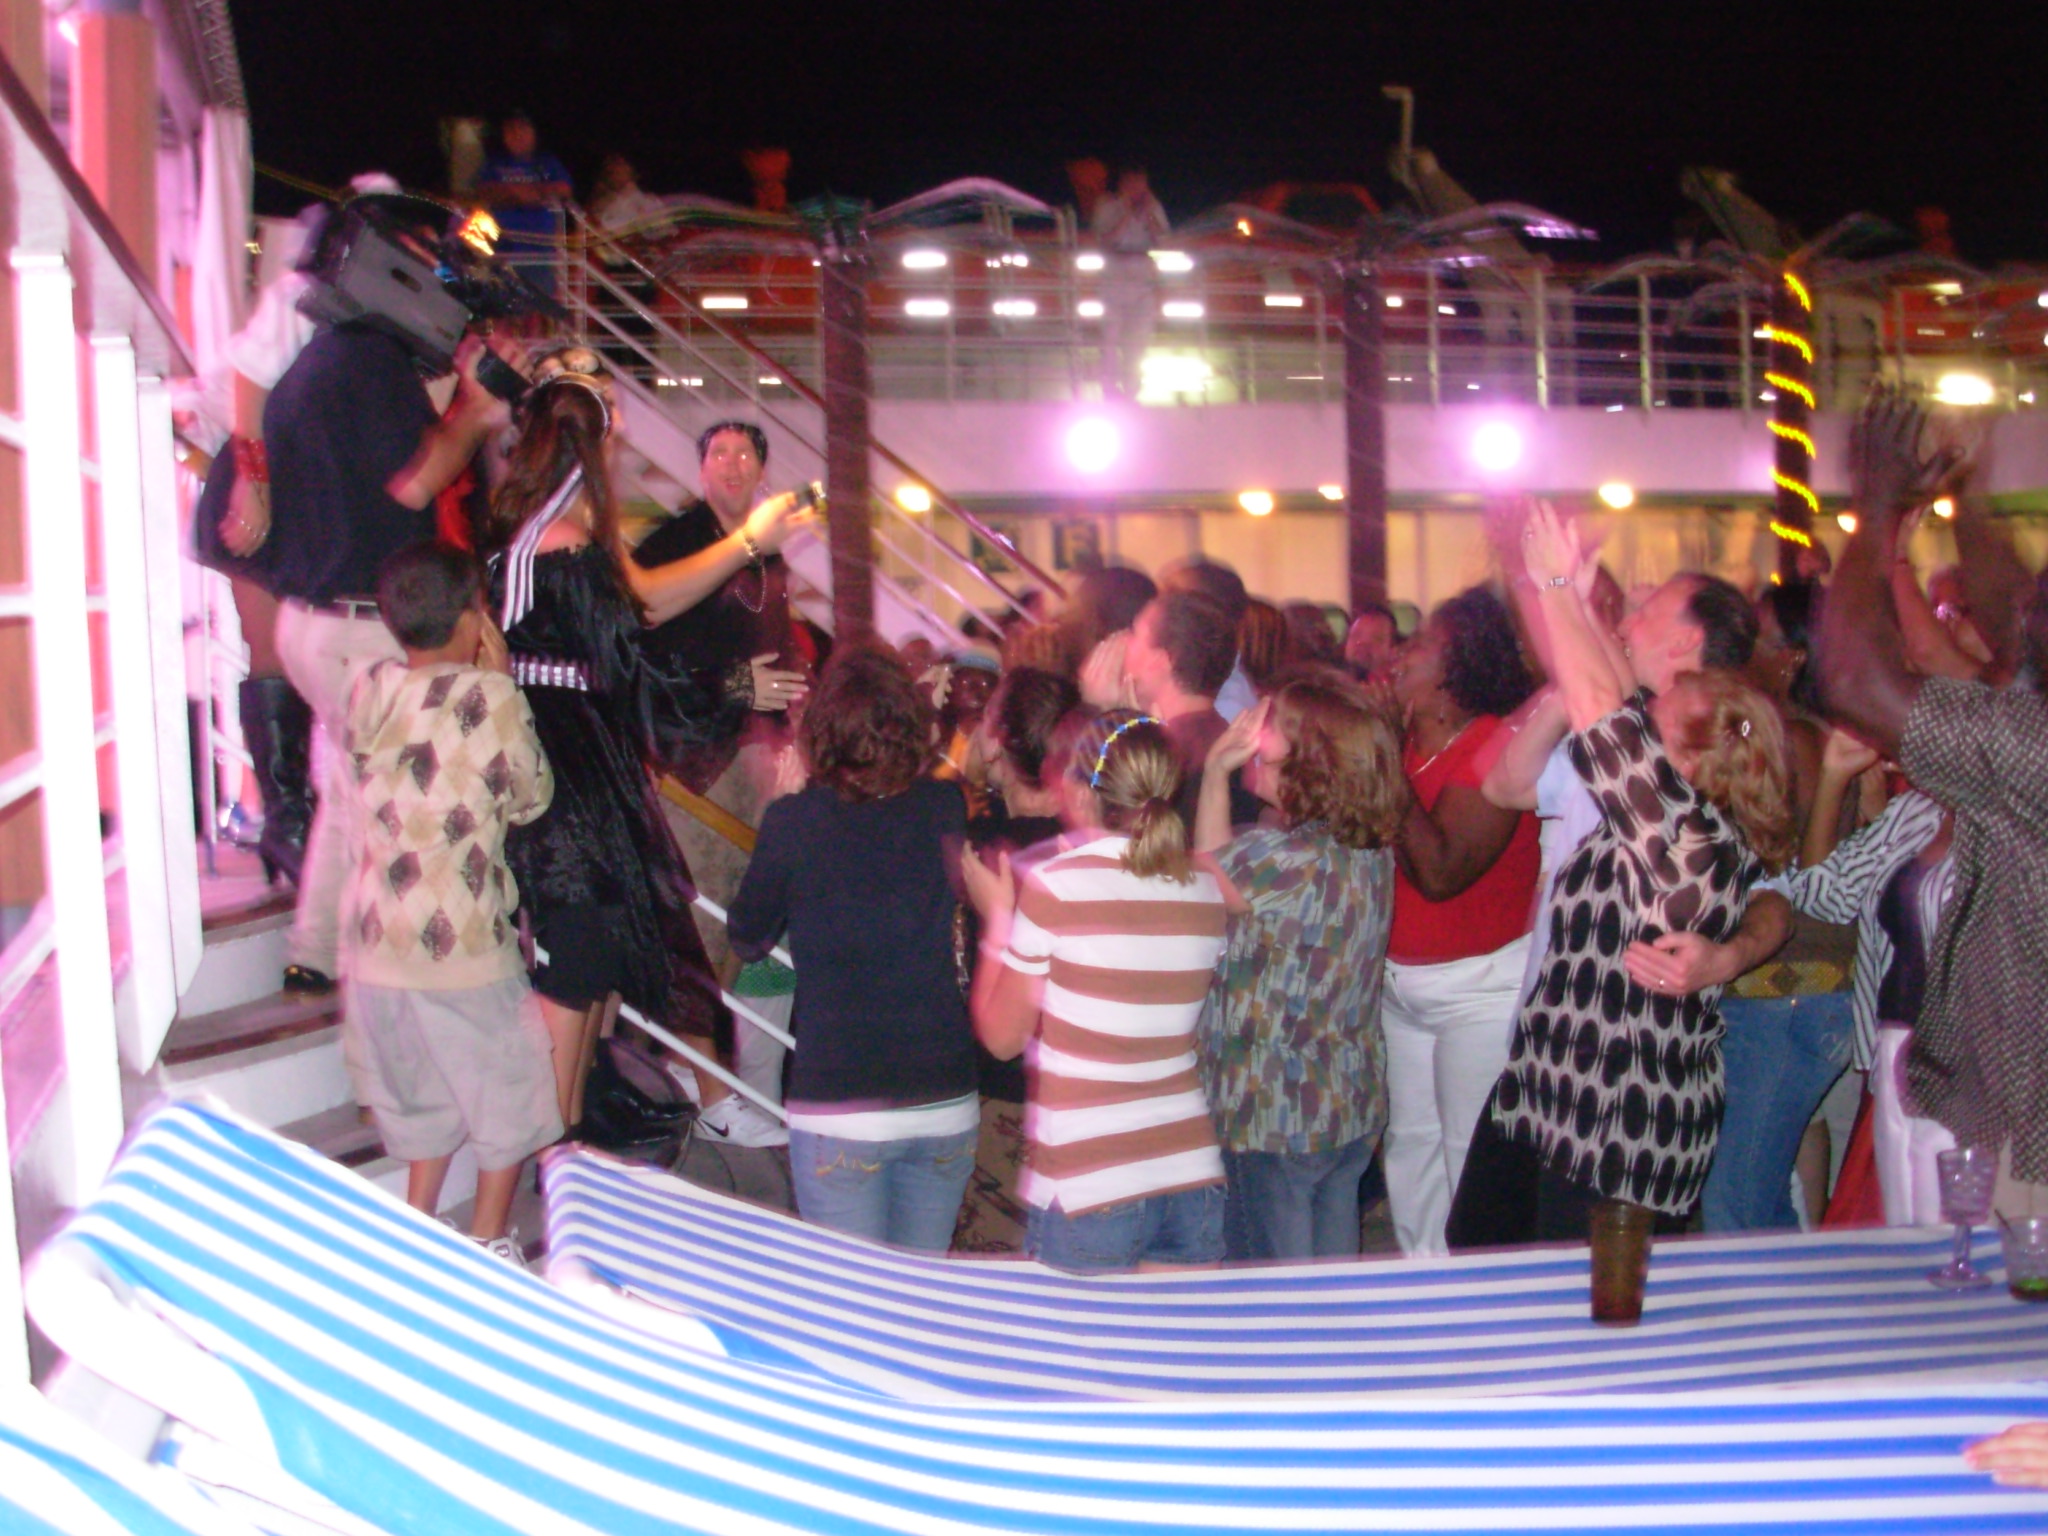 Partying on board the Carnival Inspiration
